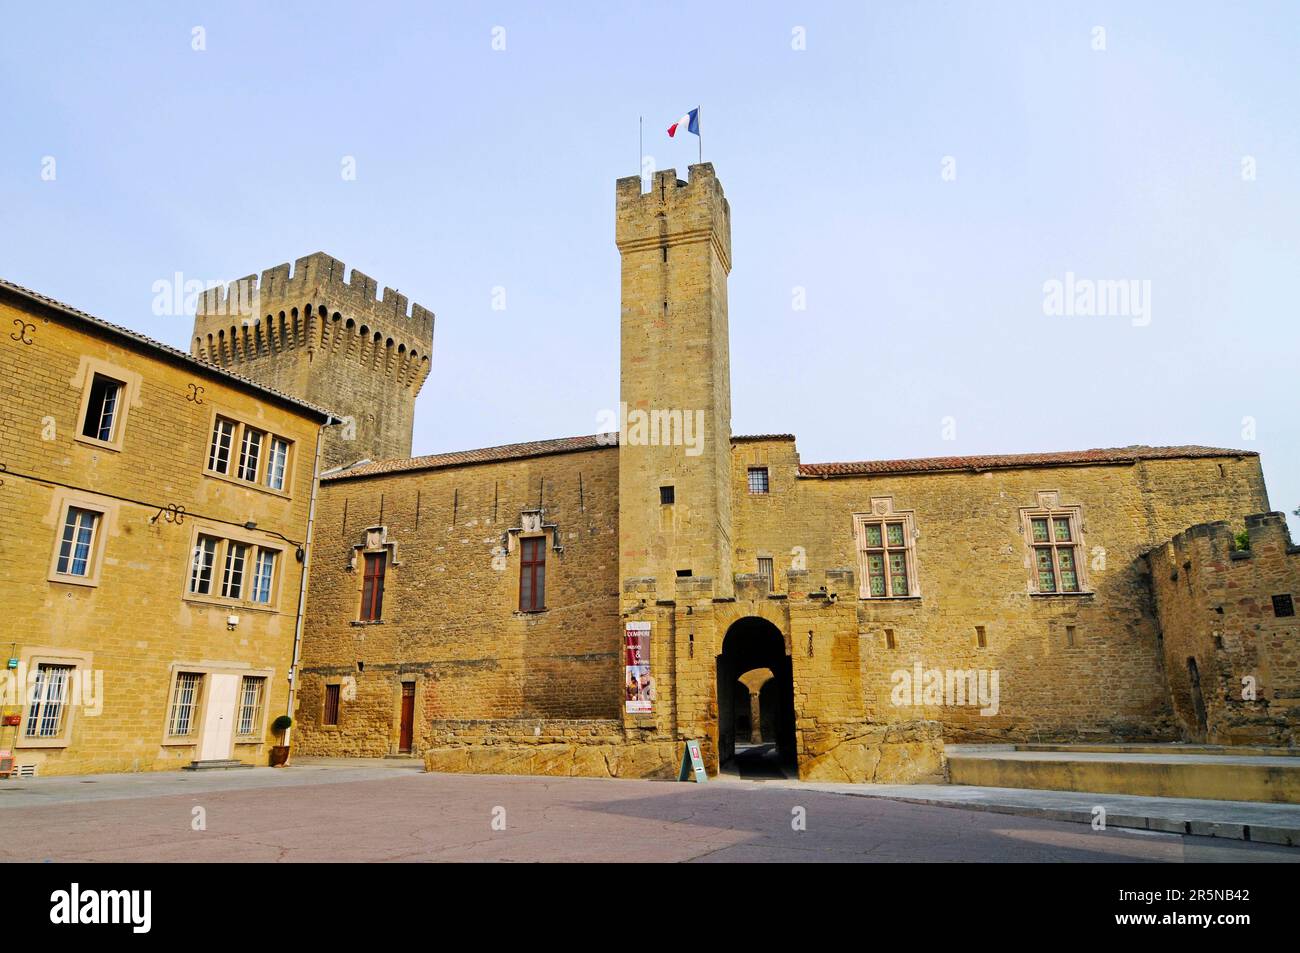 Chateau de l'Emperi, Musee, Museum of Military History, Salon-de-Provence, Bouches-du-Rhone, Southern France, France Stock Photo